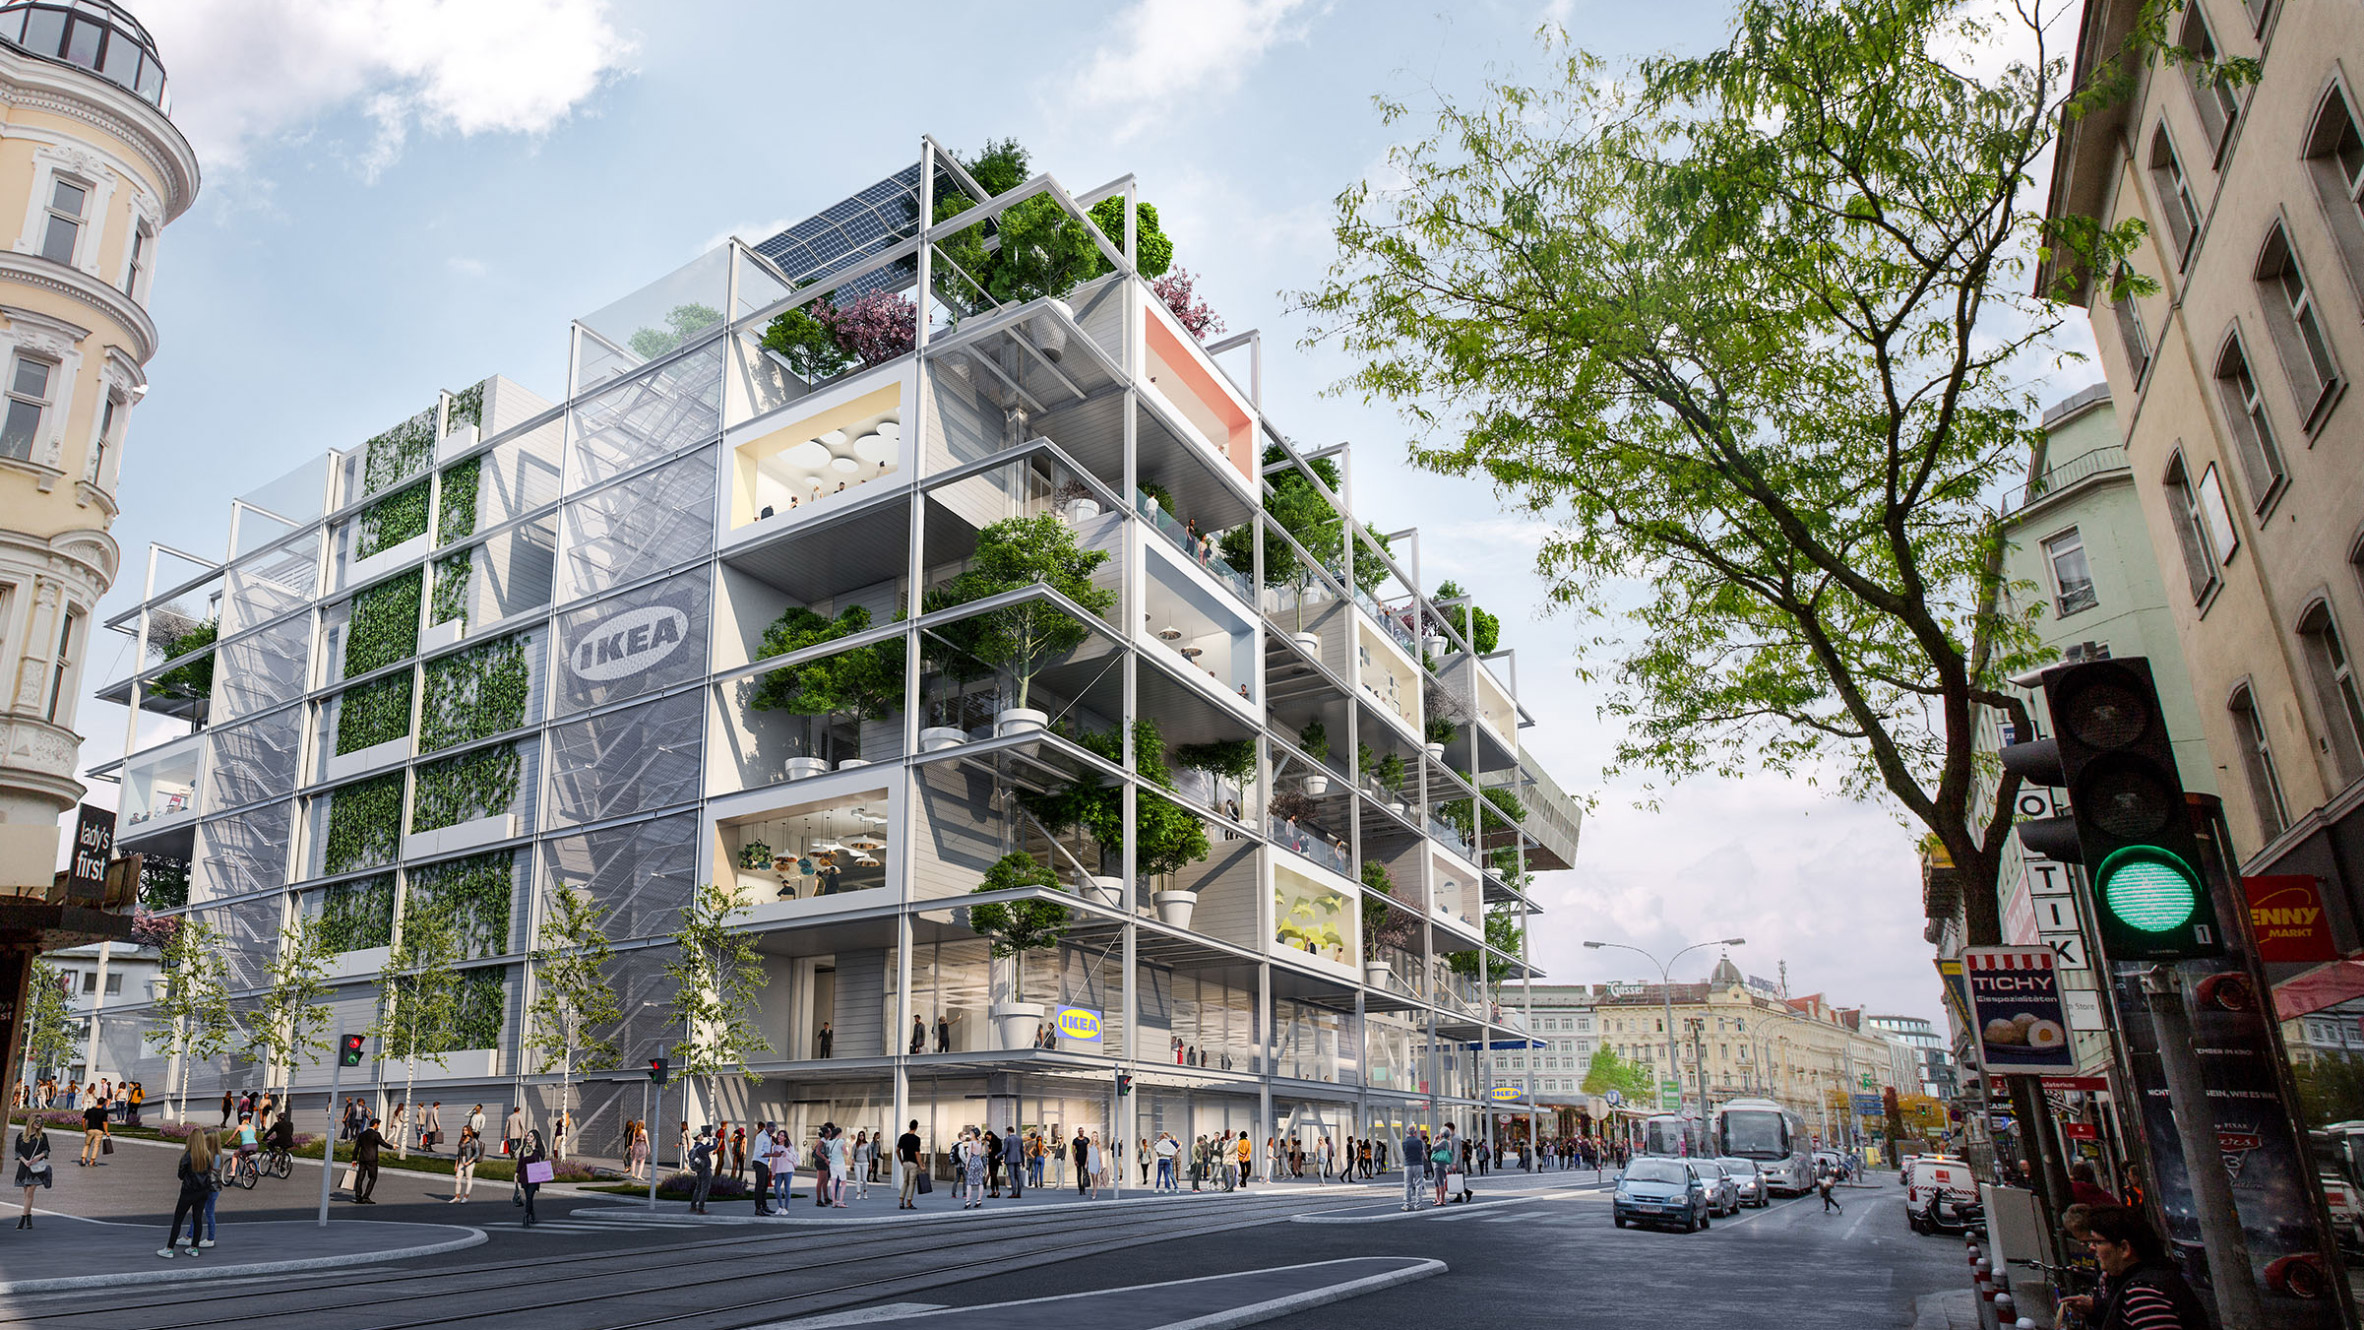 IKEA for car-free wrapped in greenery